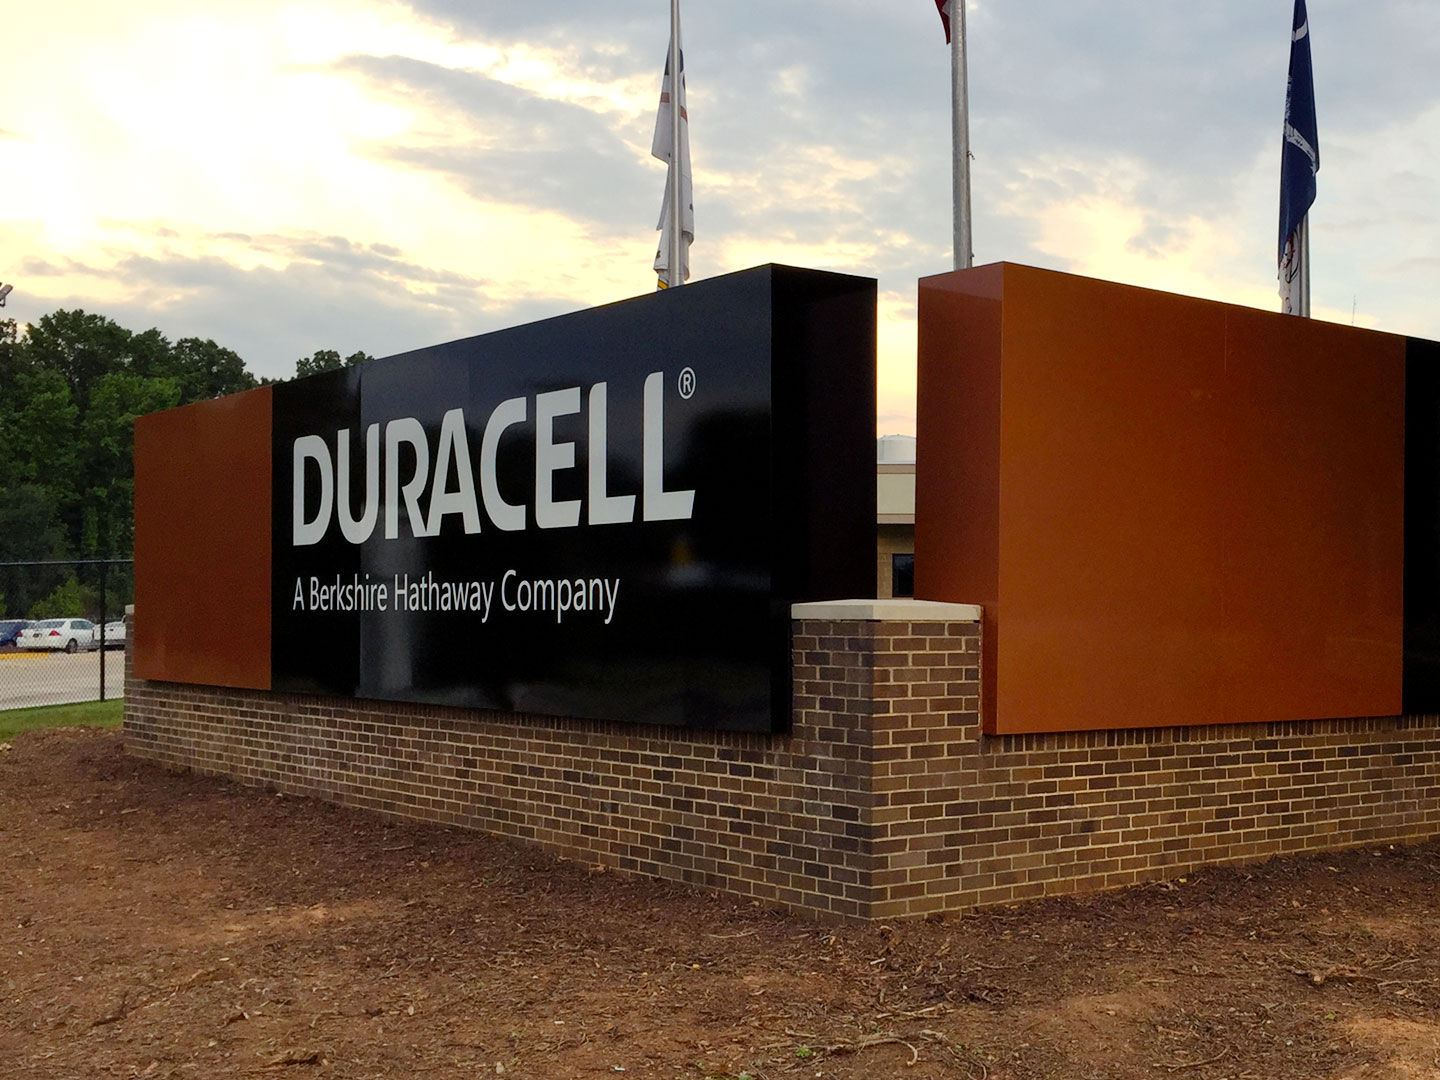 Commercial monument sign for Duracell corporation